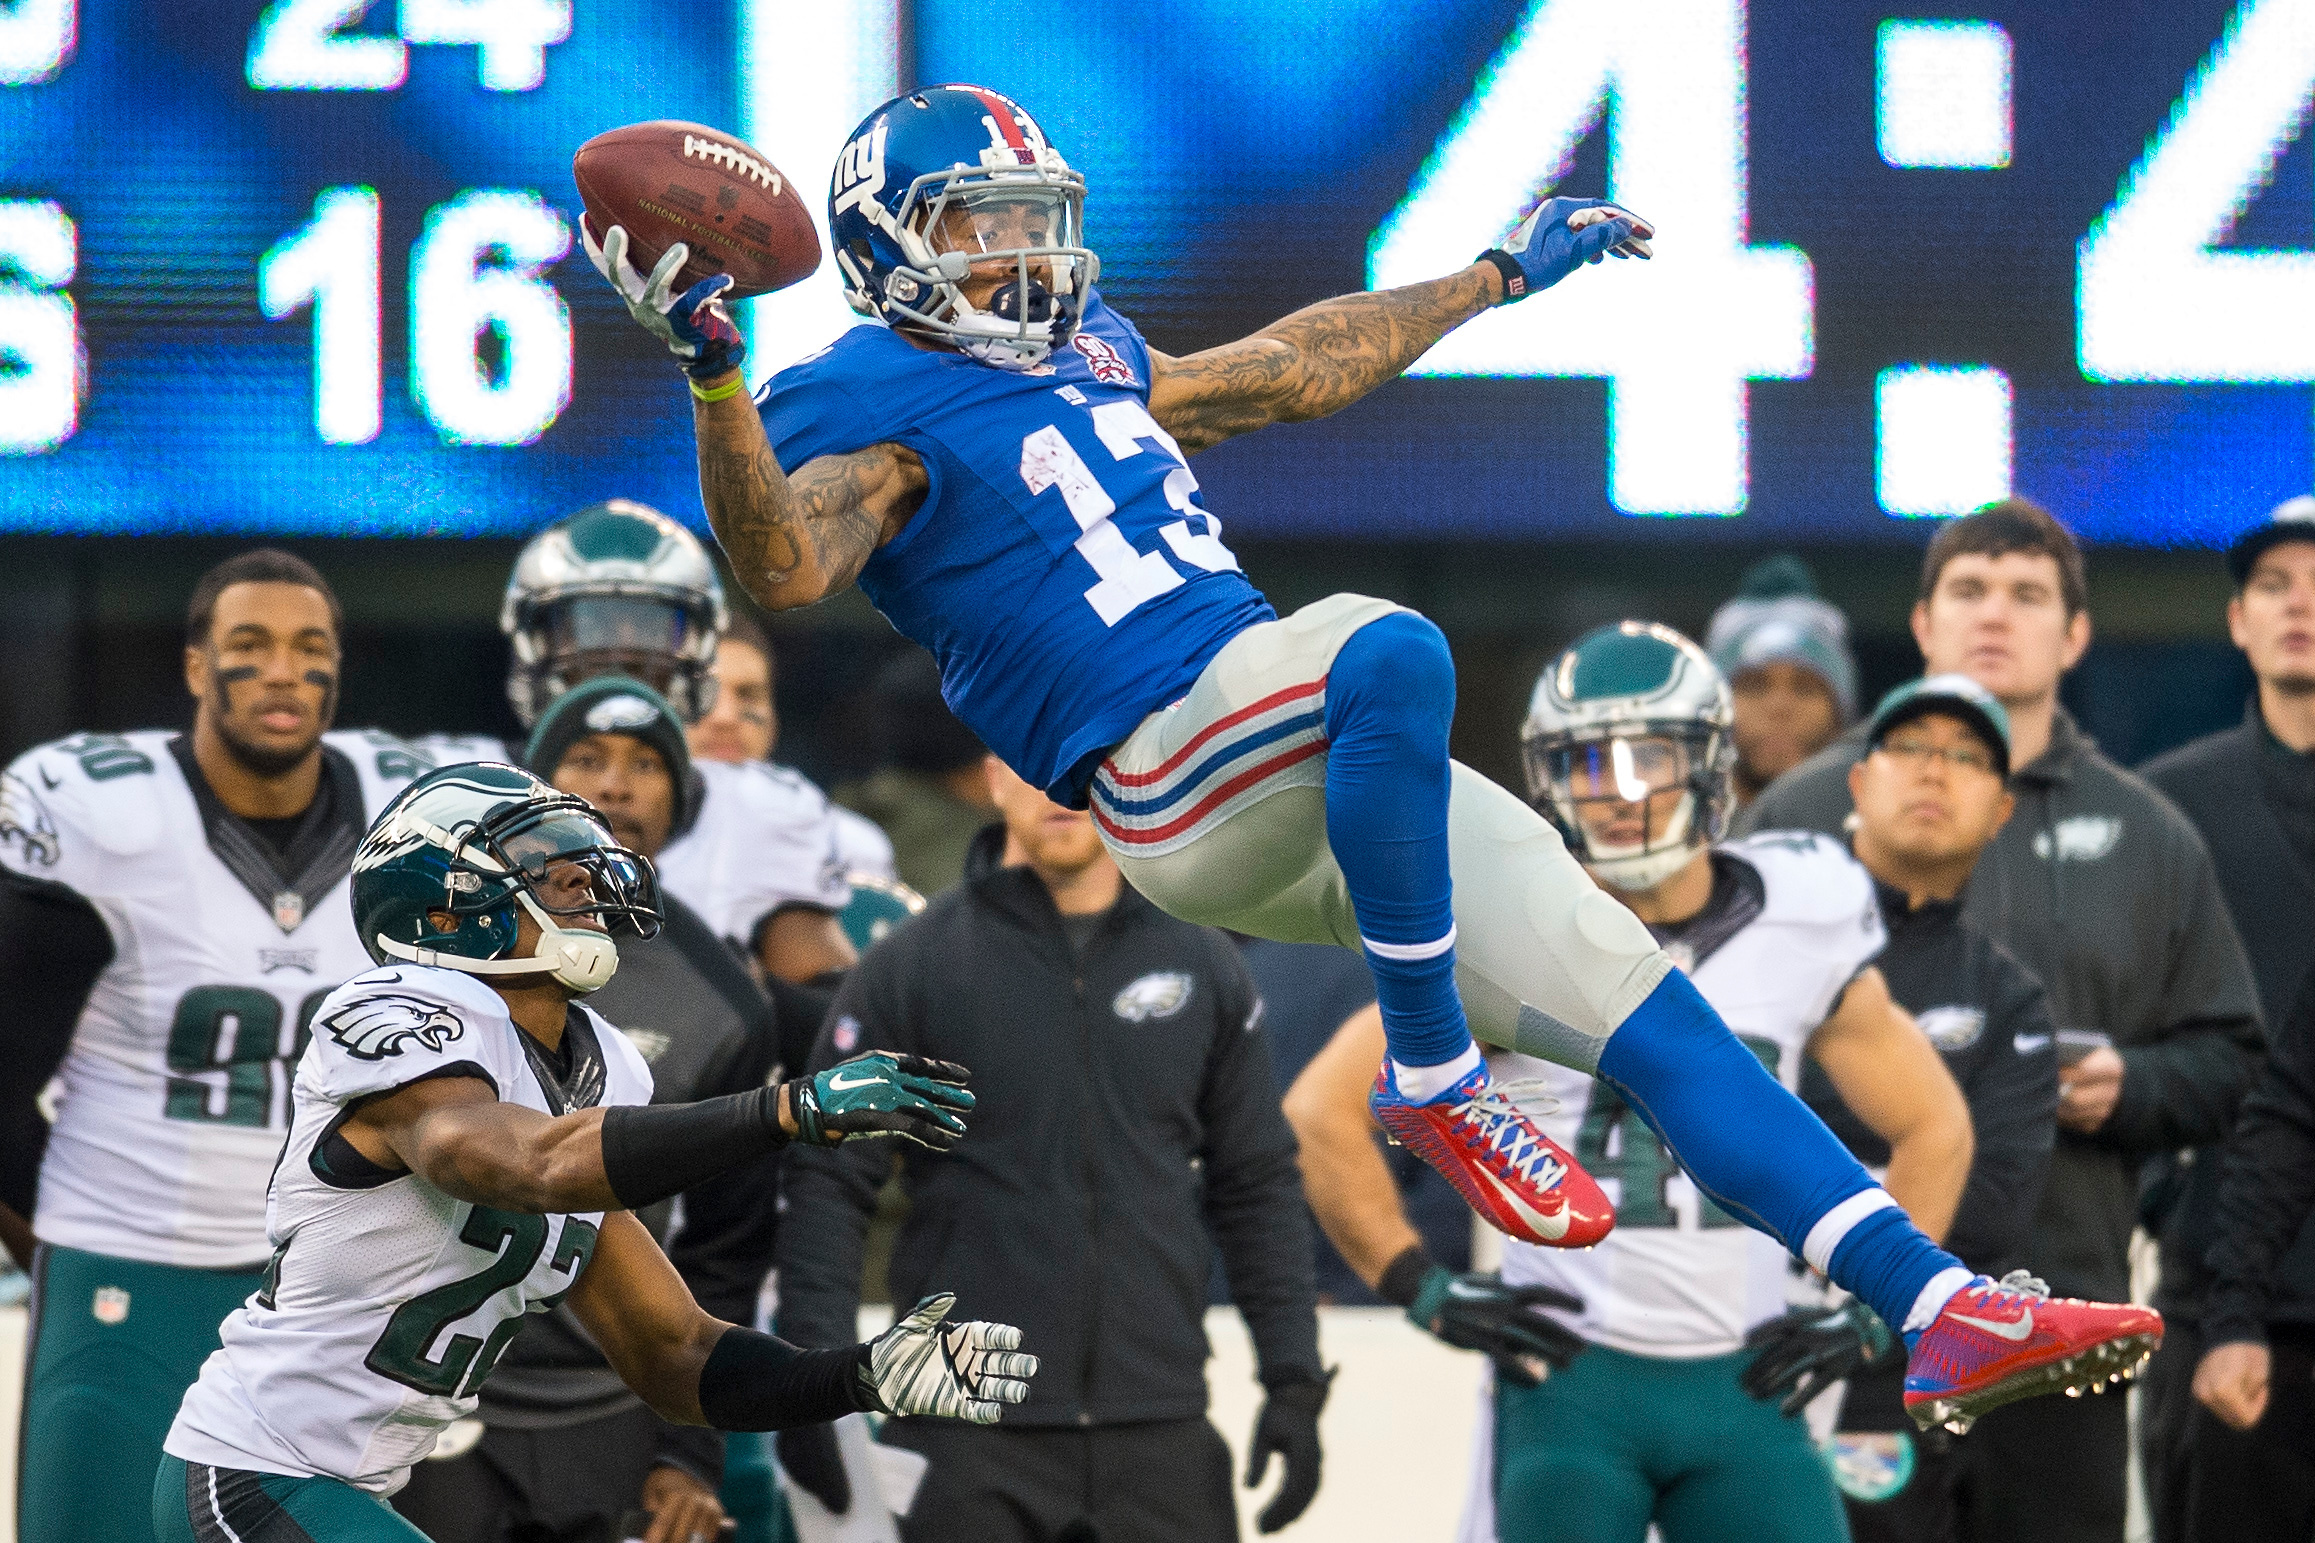 When Odell Beckham Jr. Made 1 of the Greatest Catches in NFL History, His  Dad Just Shrugged